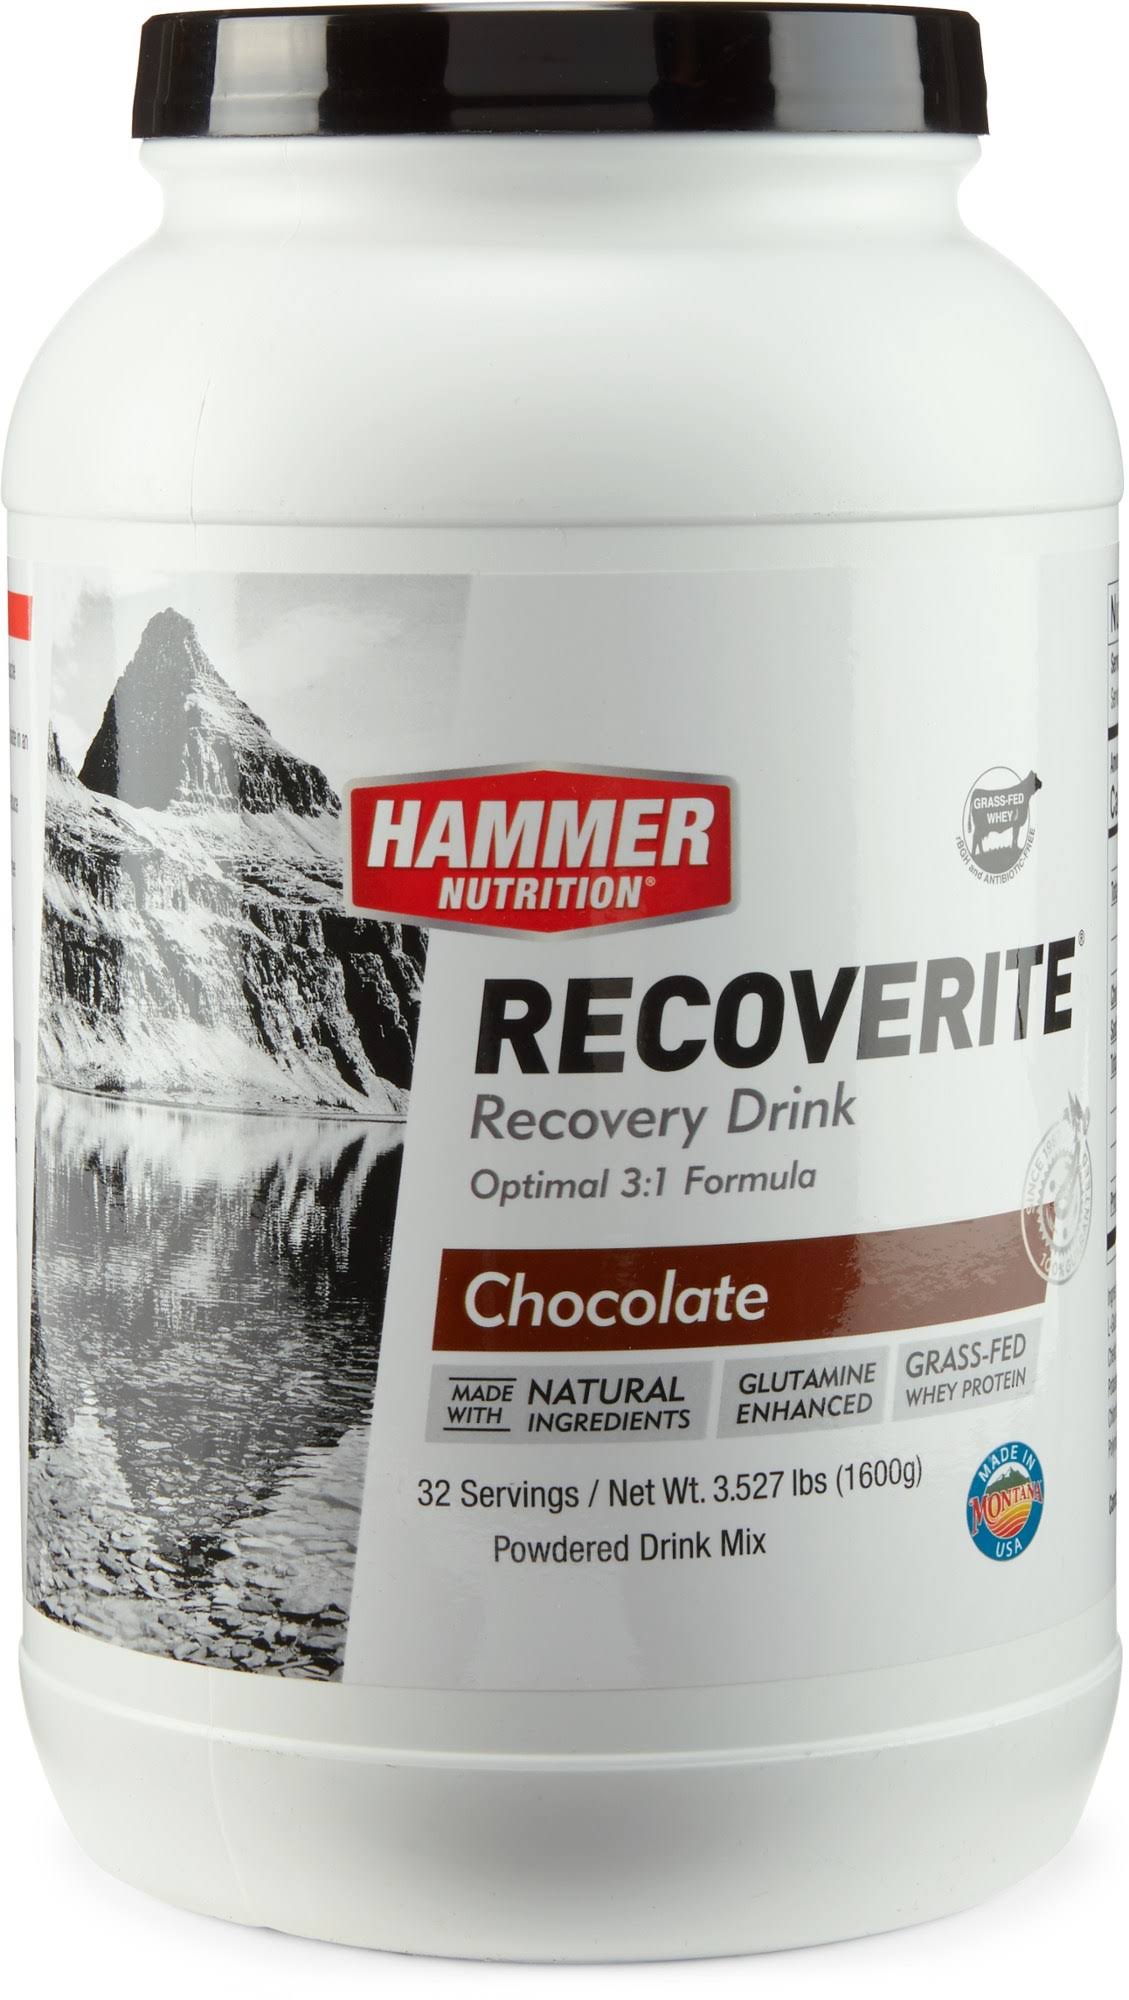 Hammer Nutrition Recoverite - Chocolate, 3.45lbs